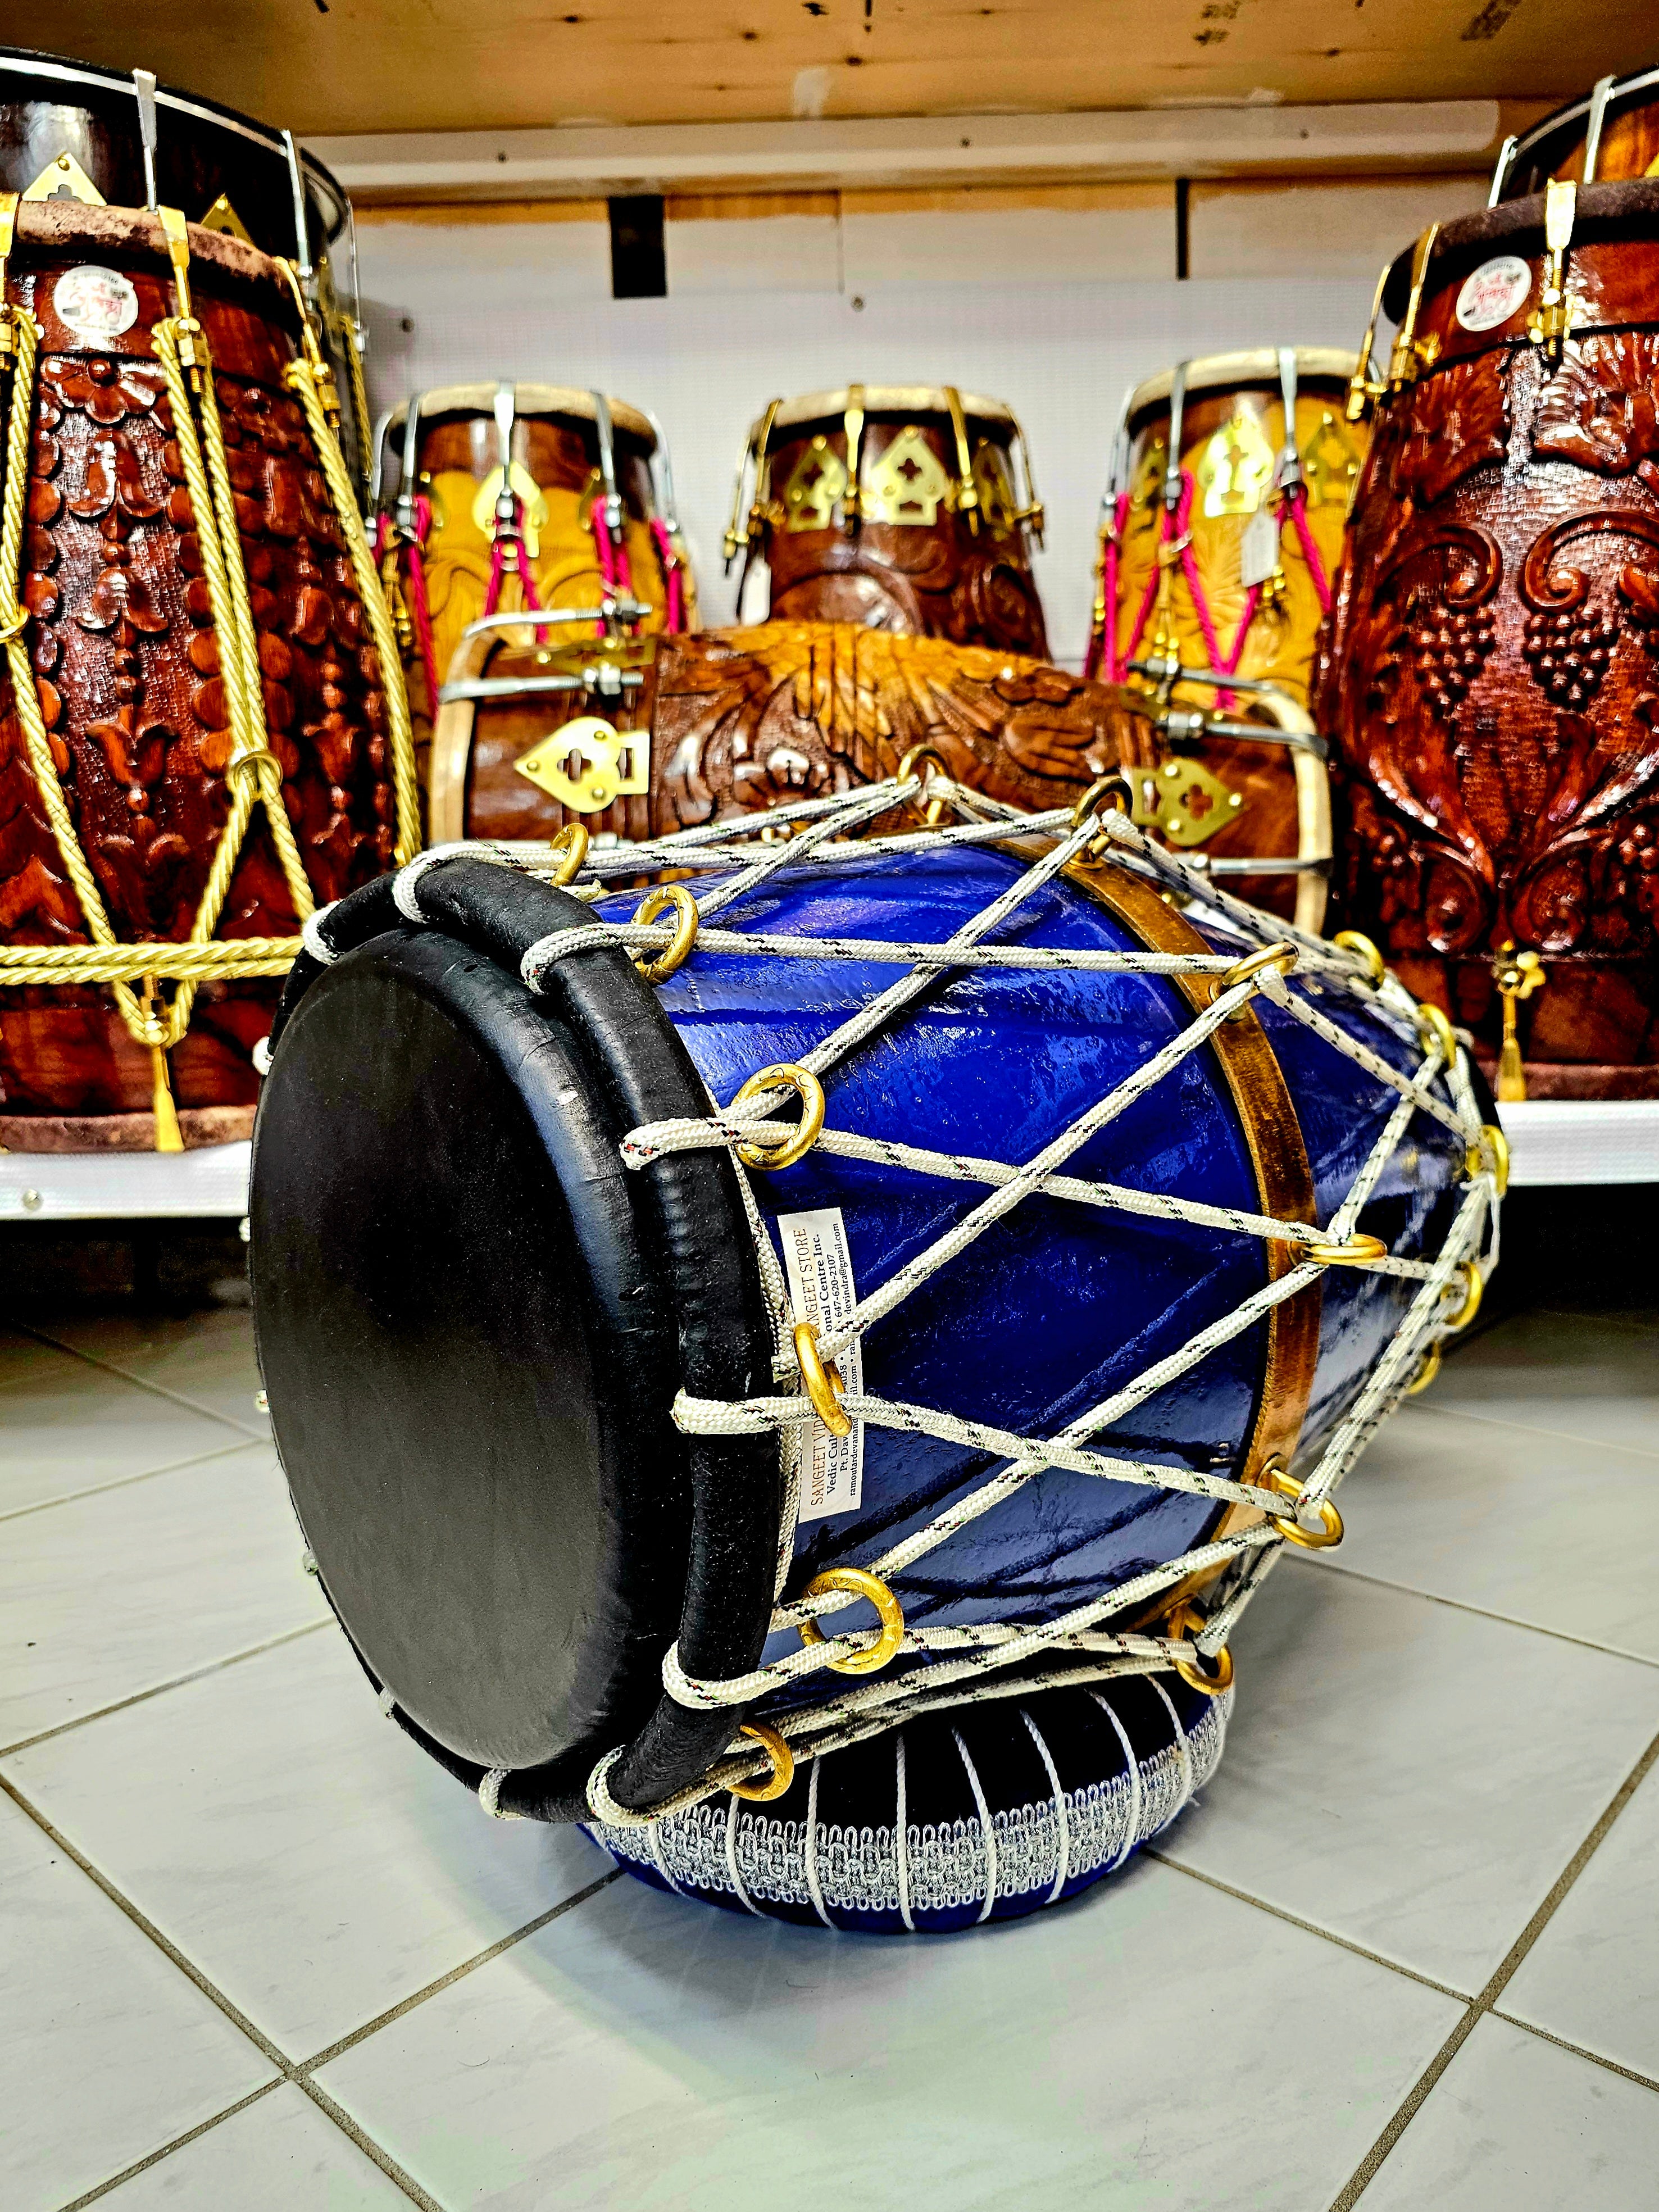 The Caribbean Breeze Compact Dholak - A Blue Compact 19" West-Indian Dholak with White Ropes and Golden Rings!